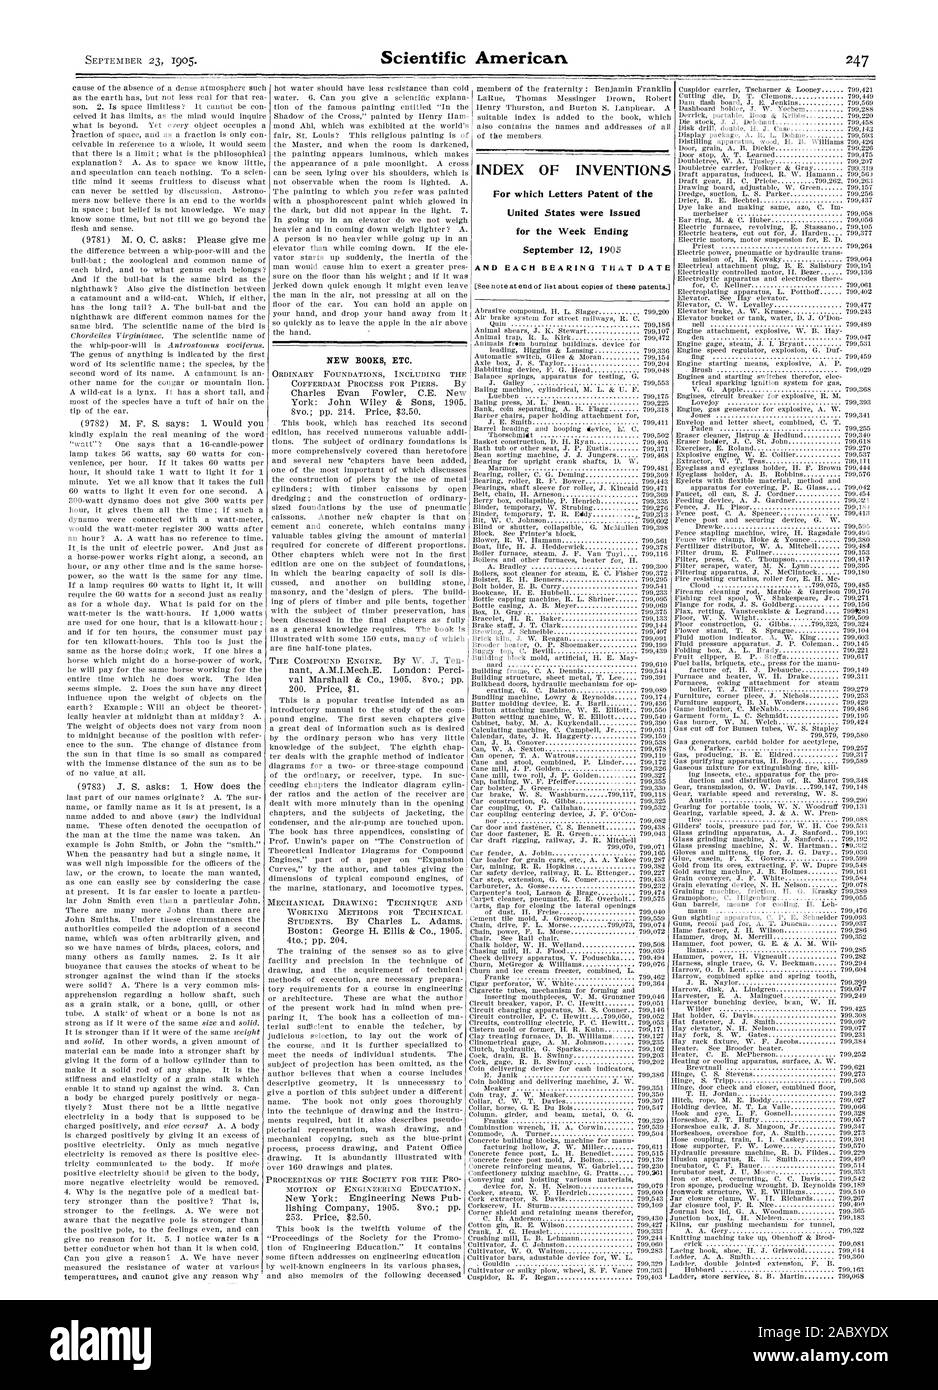 INDEX OF INVENTIONS For which Letters Patent of the United States were Issued for the Week Ending September 12 1905 AND EACH BEARING THAT DATE, scientific american, 1905-09-23 Stock Photo